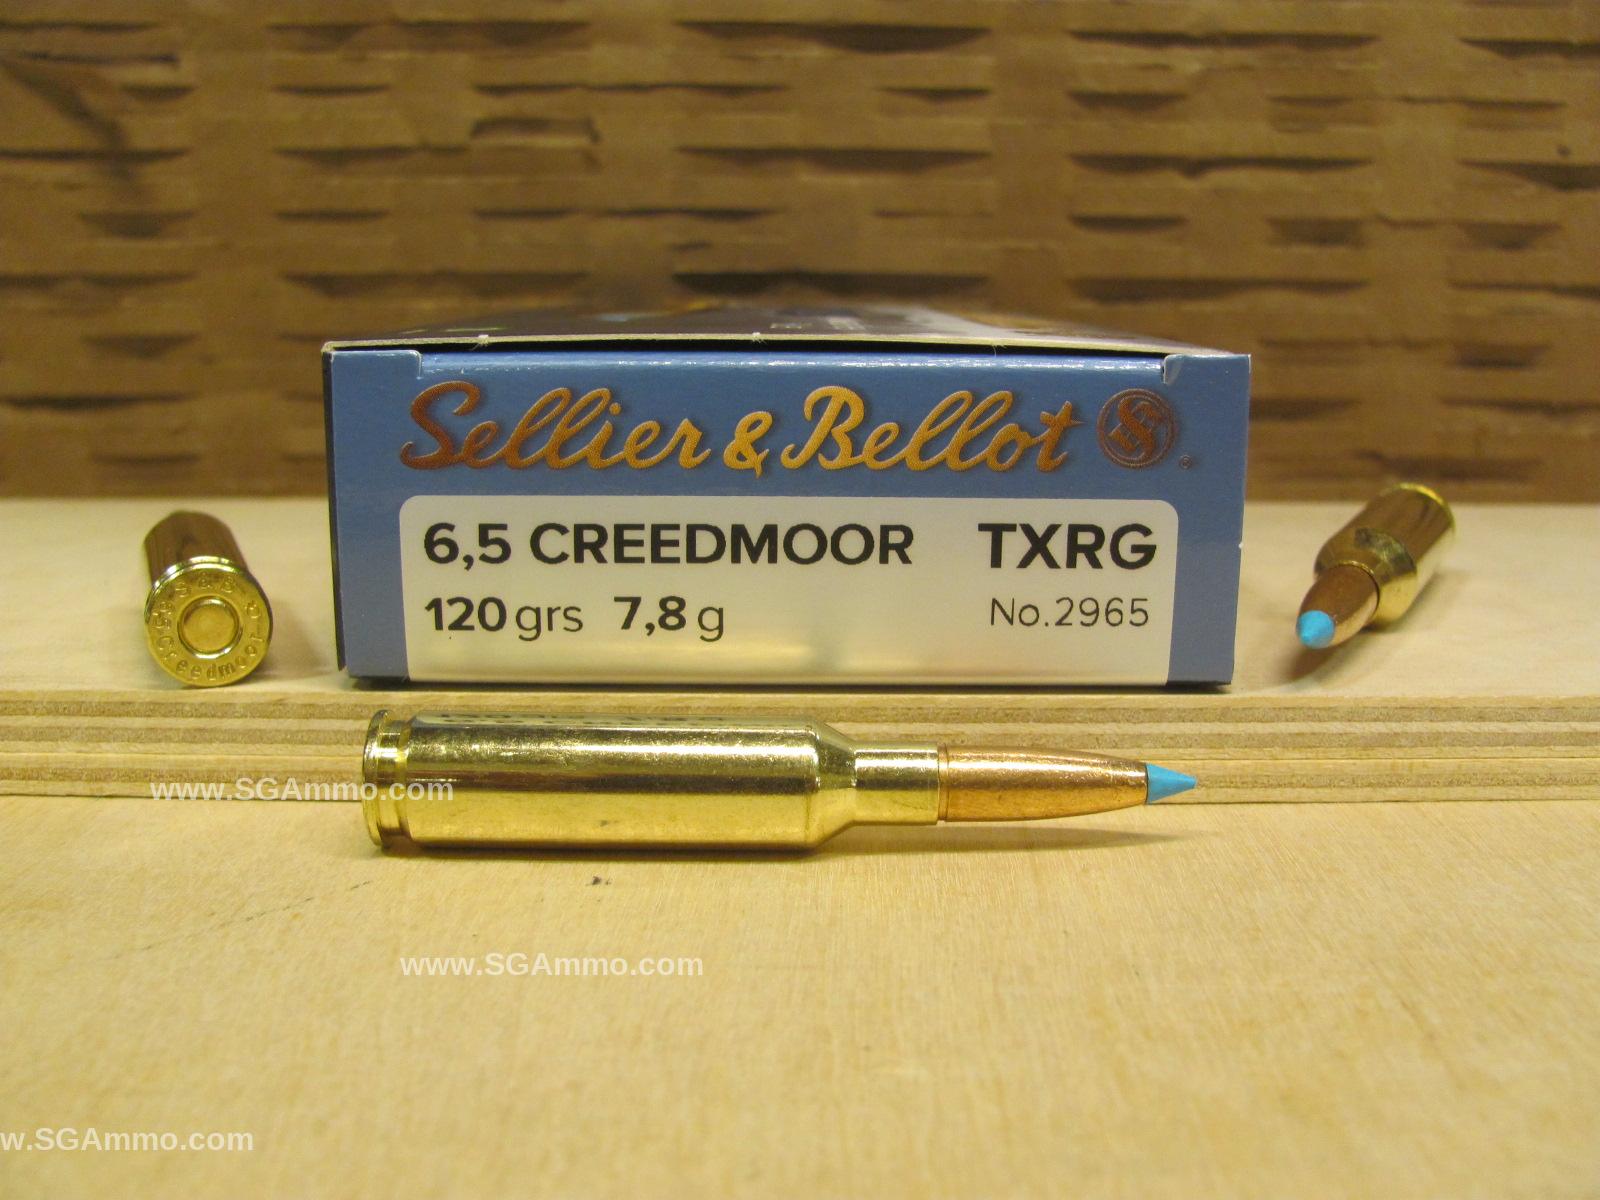 100 Round Plastic Can - 6.5 Creedmoor 120 Grain TXRG Sellier Bellot Exergy Ammo - SB65XA - Packed in Plastic Ammo Canister